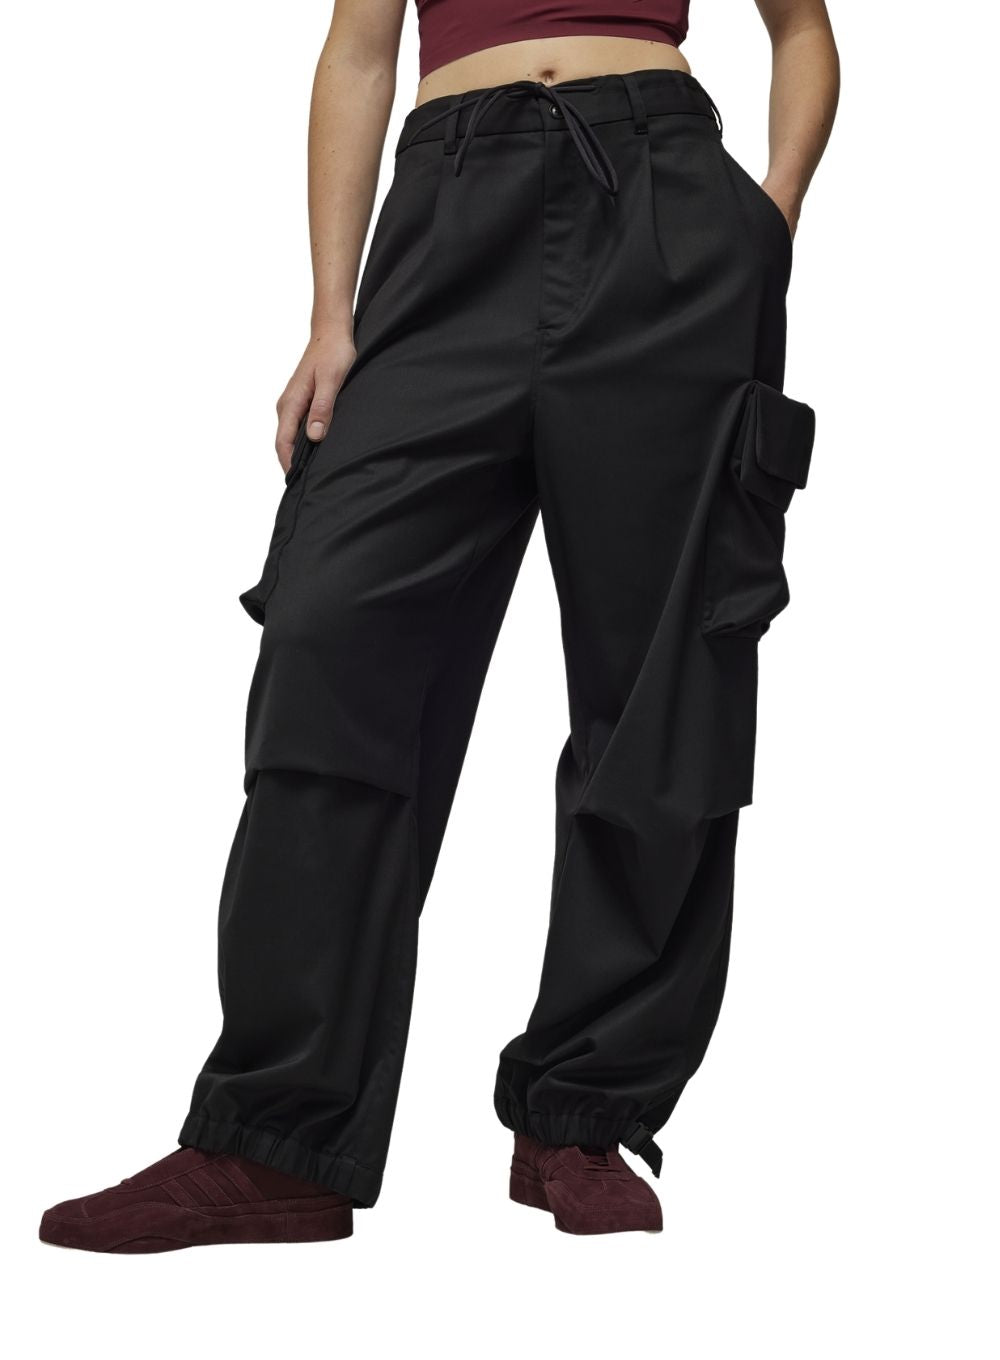 Y-3 | Refined Woven Cargo Pant